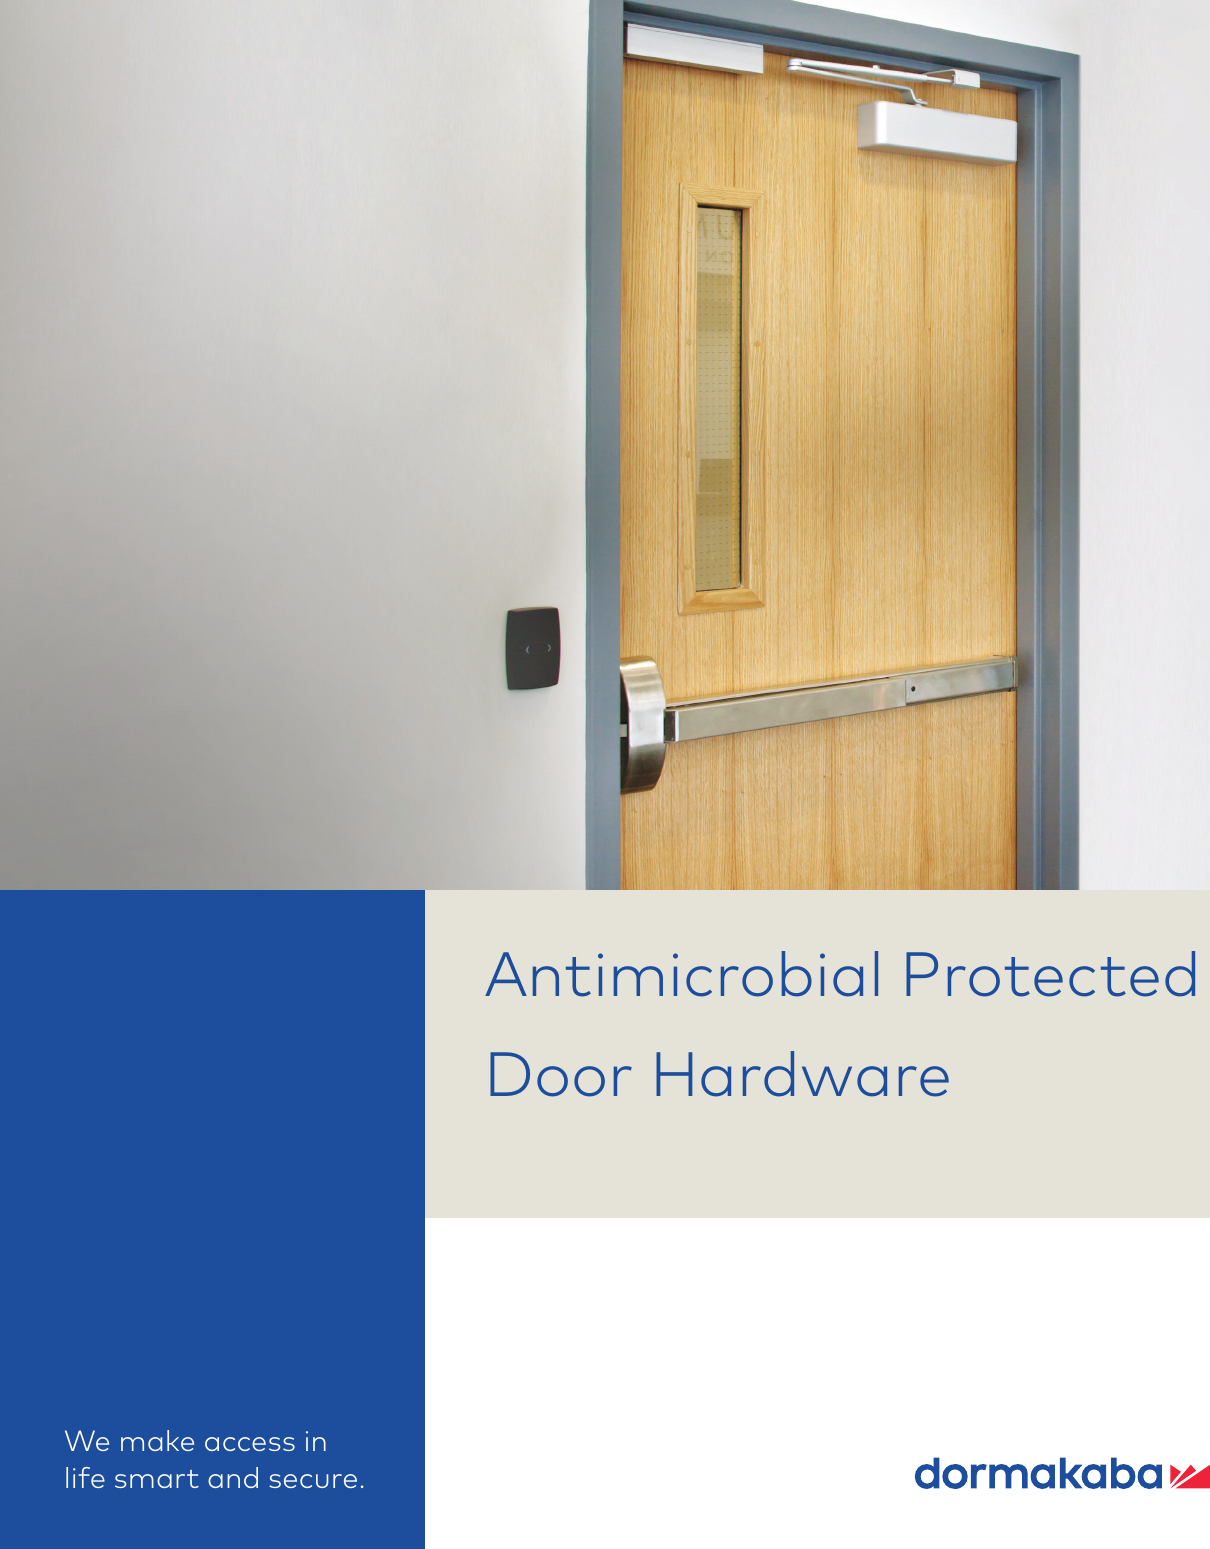 Page 1 of 4 - Dorma  Antimicrobial Protected Door Hardware Brochure Dormakaba-antimicrobial-protected-door-hardware-brochure